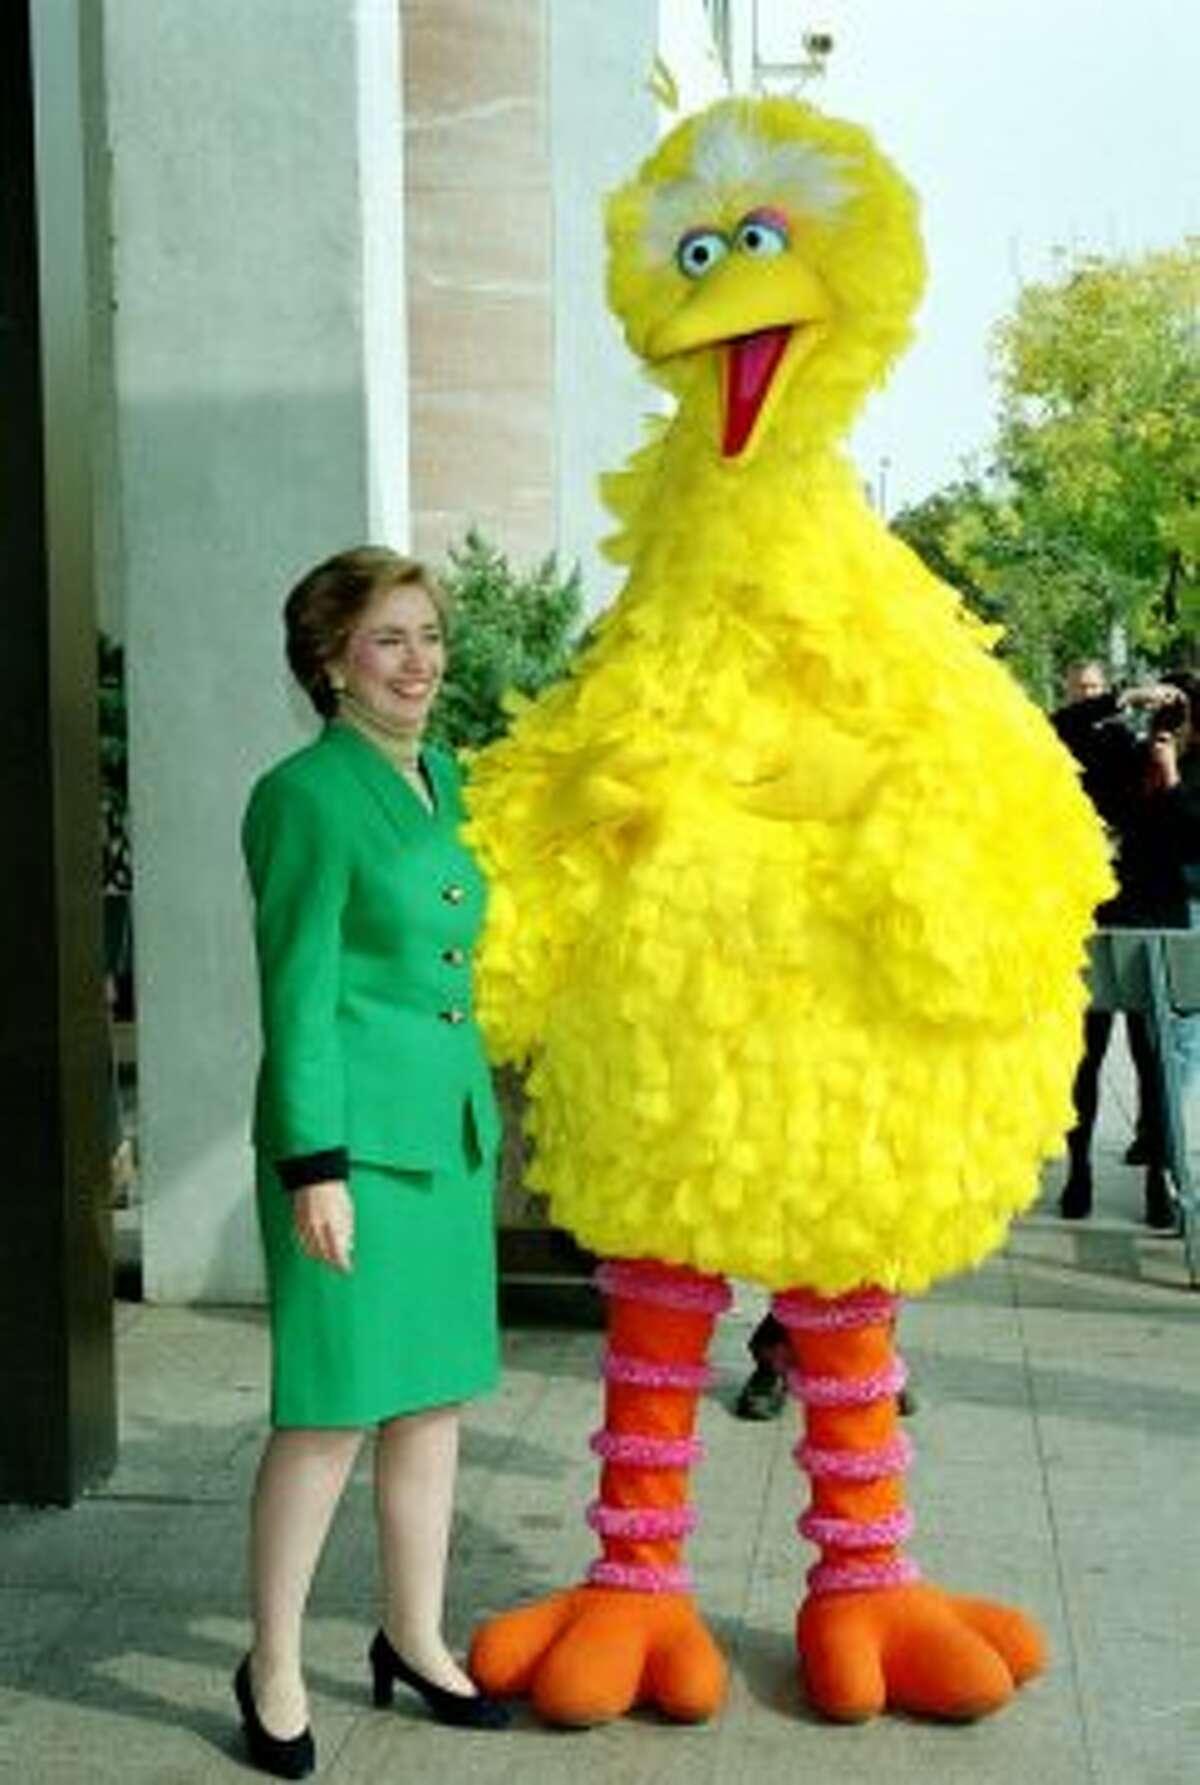 Former First Lady Hillary Clinton poses with Big Bird outside the White House. (AP Photo)